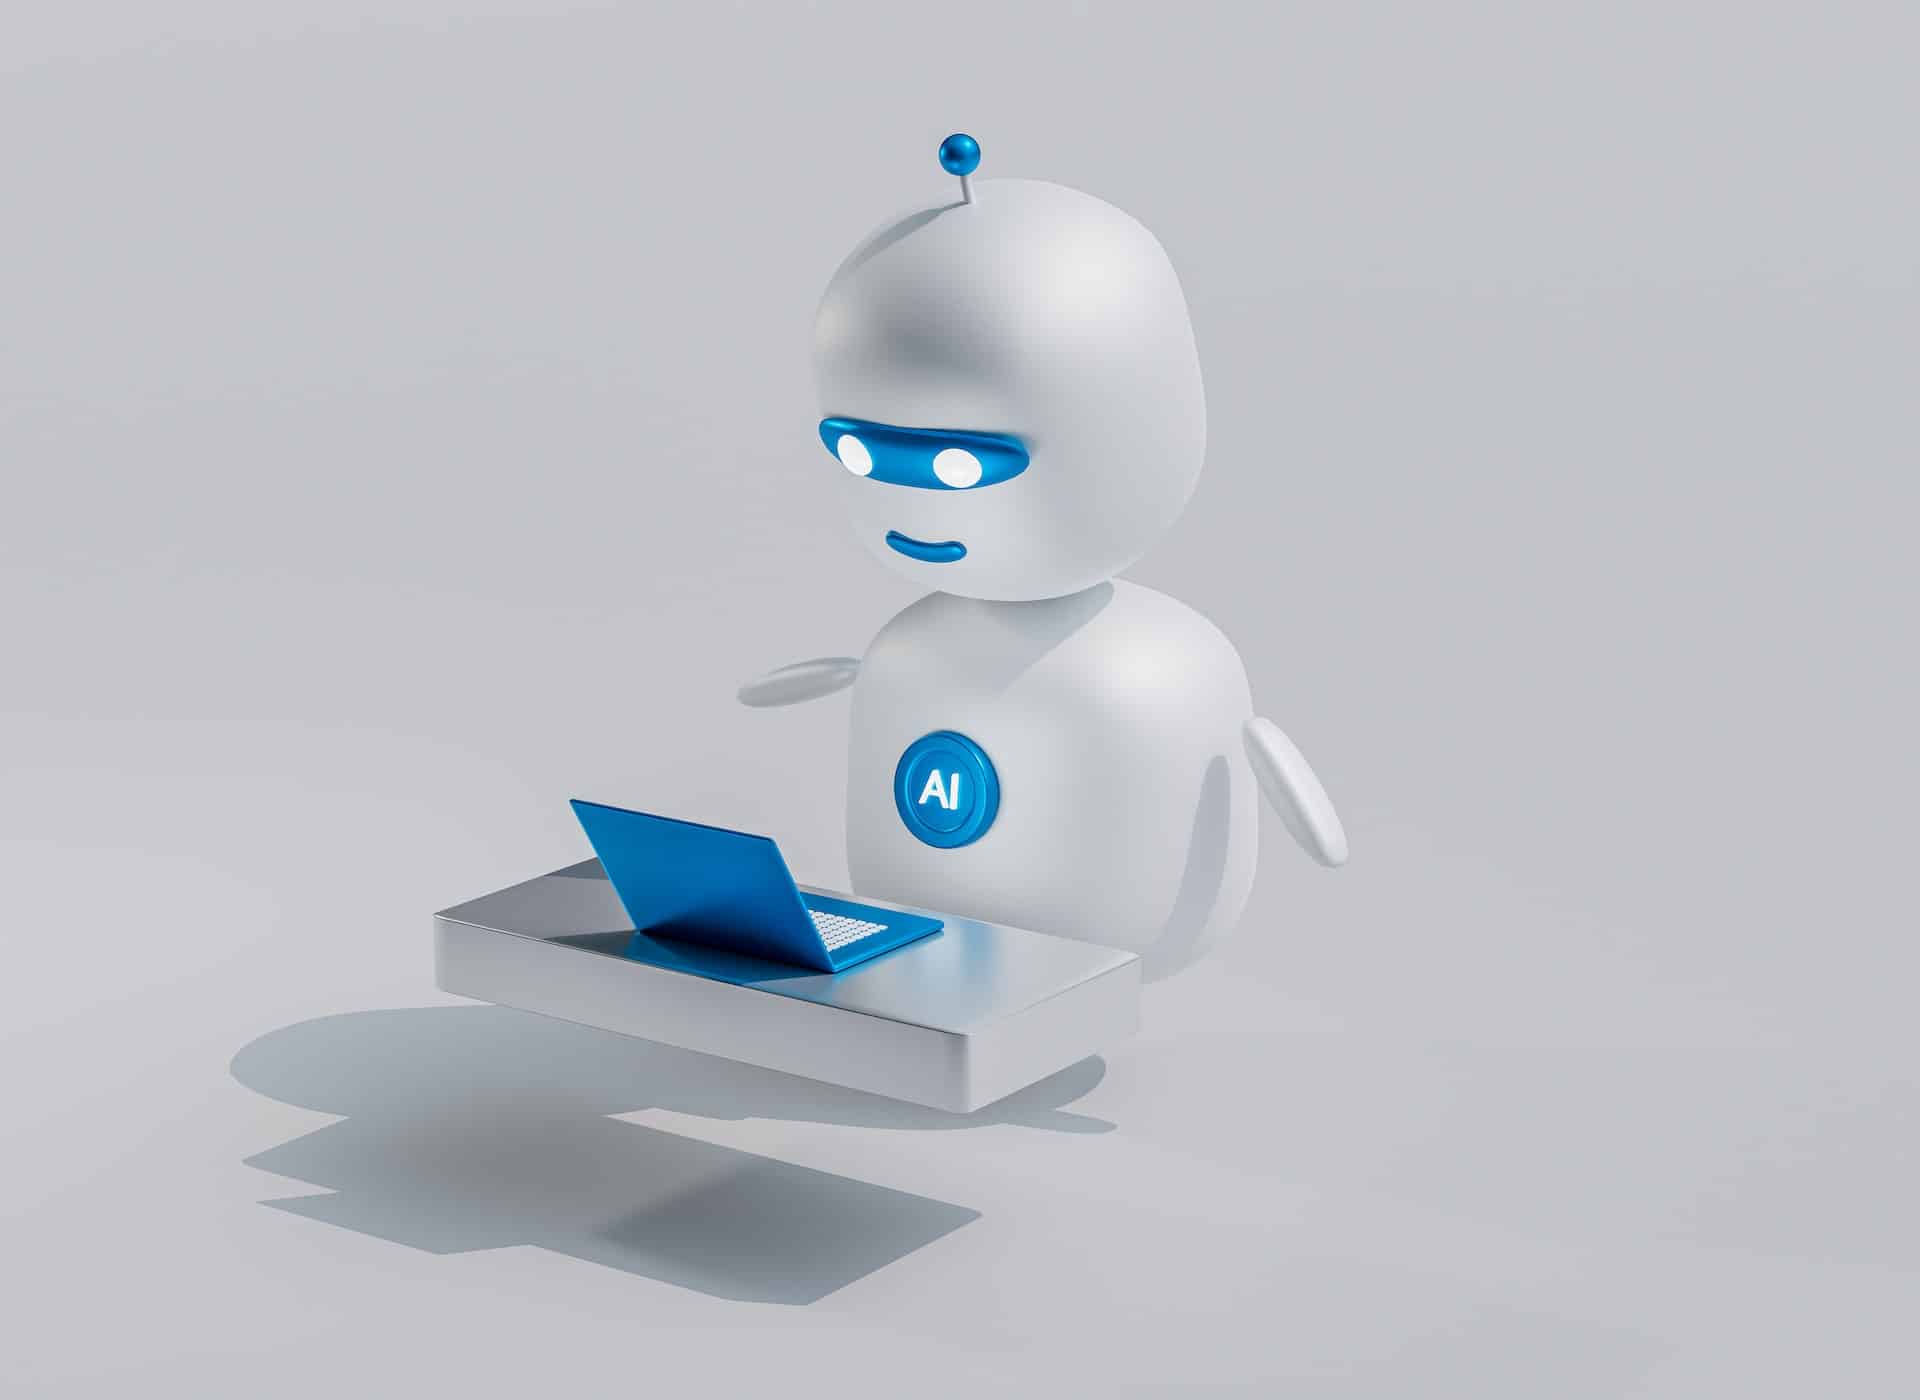 Source: https://unsplash.com/photos/a-white-robot-with-blue-eyes-and-a-laptop--0xMiYQmk8g Title: Automation Alt. Title: Automation in Event Marketing Description: An AI bot operating a computer